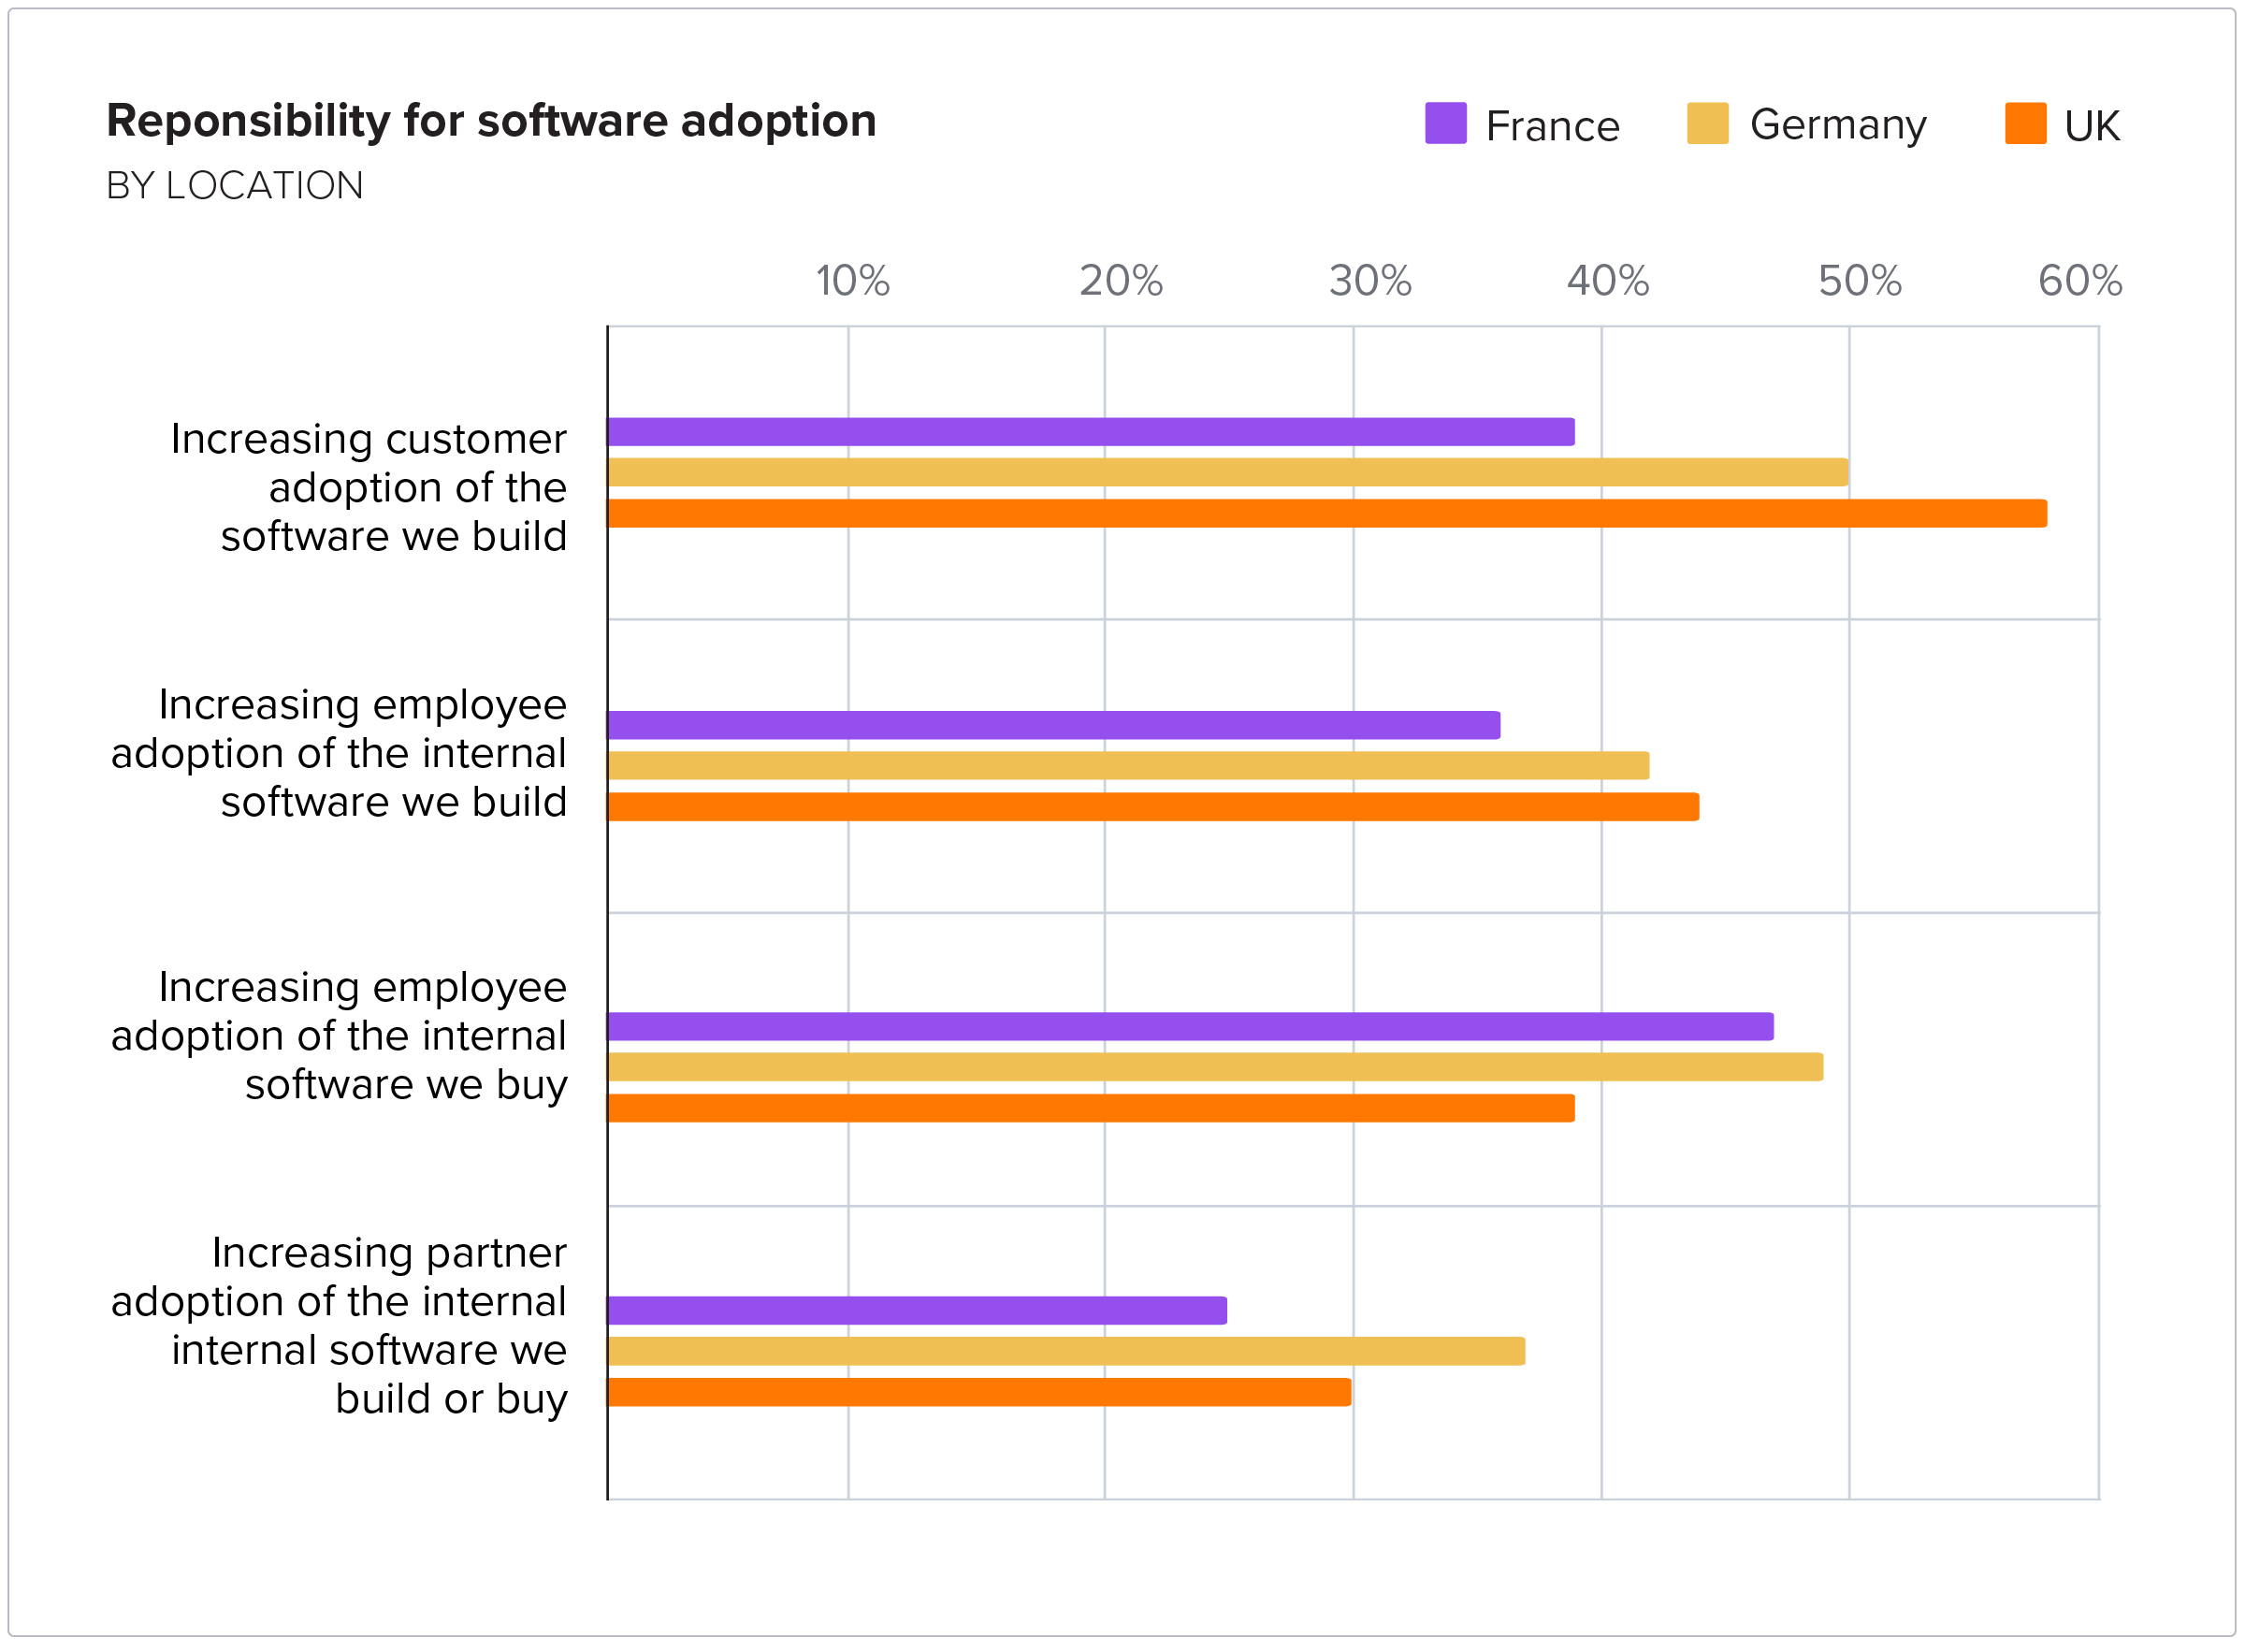 Responsibility for software adoption by location